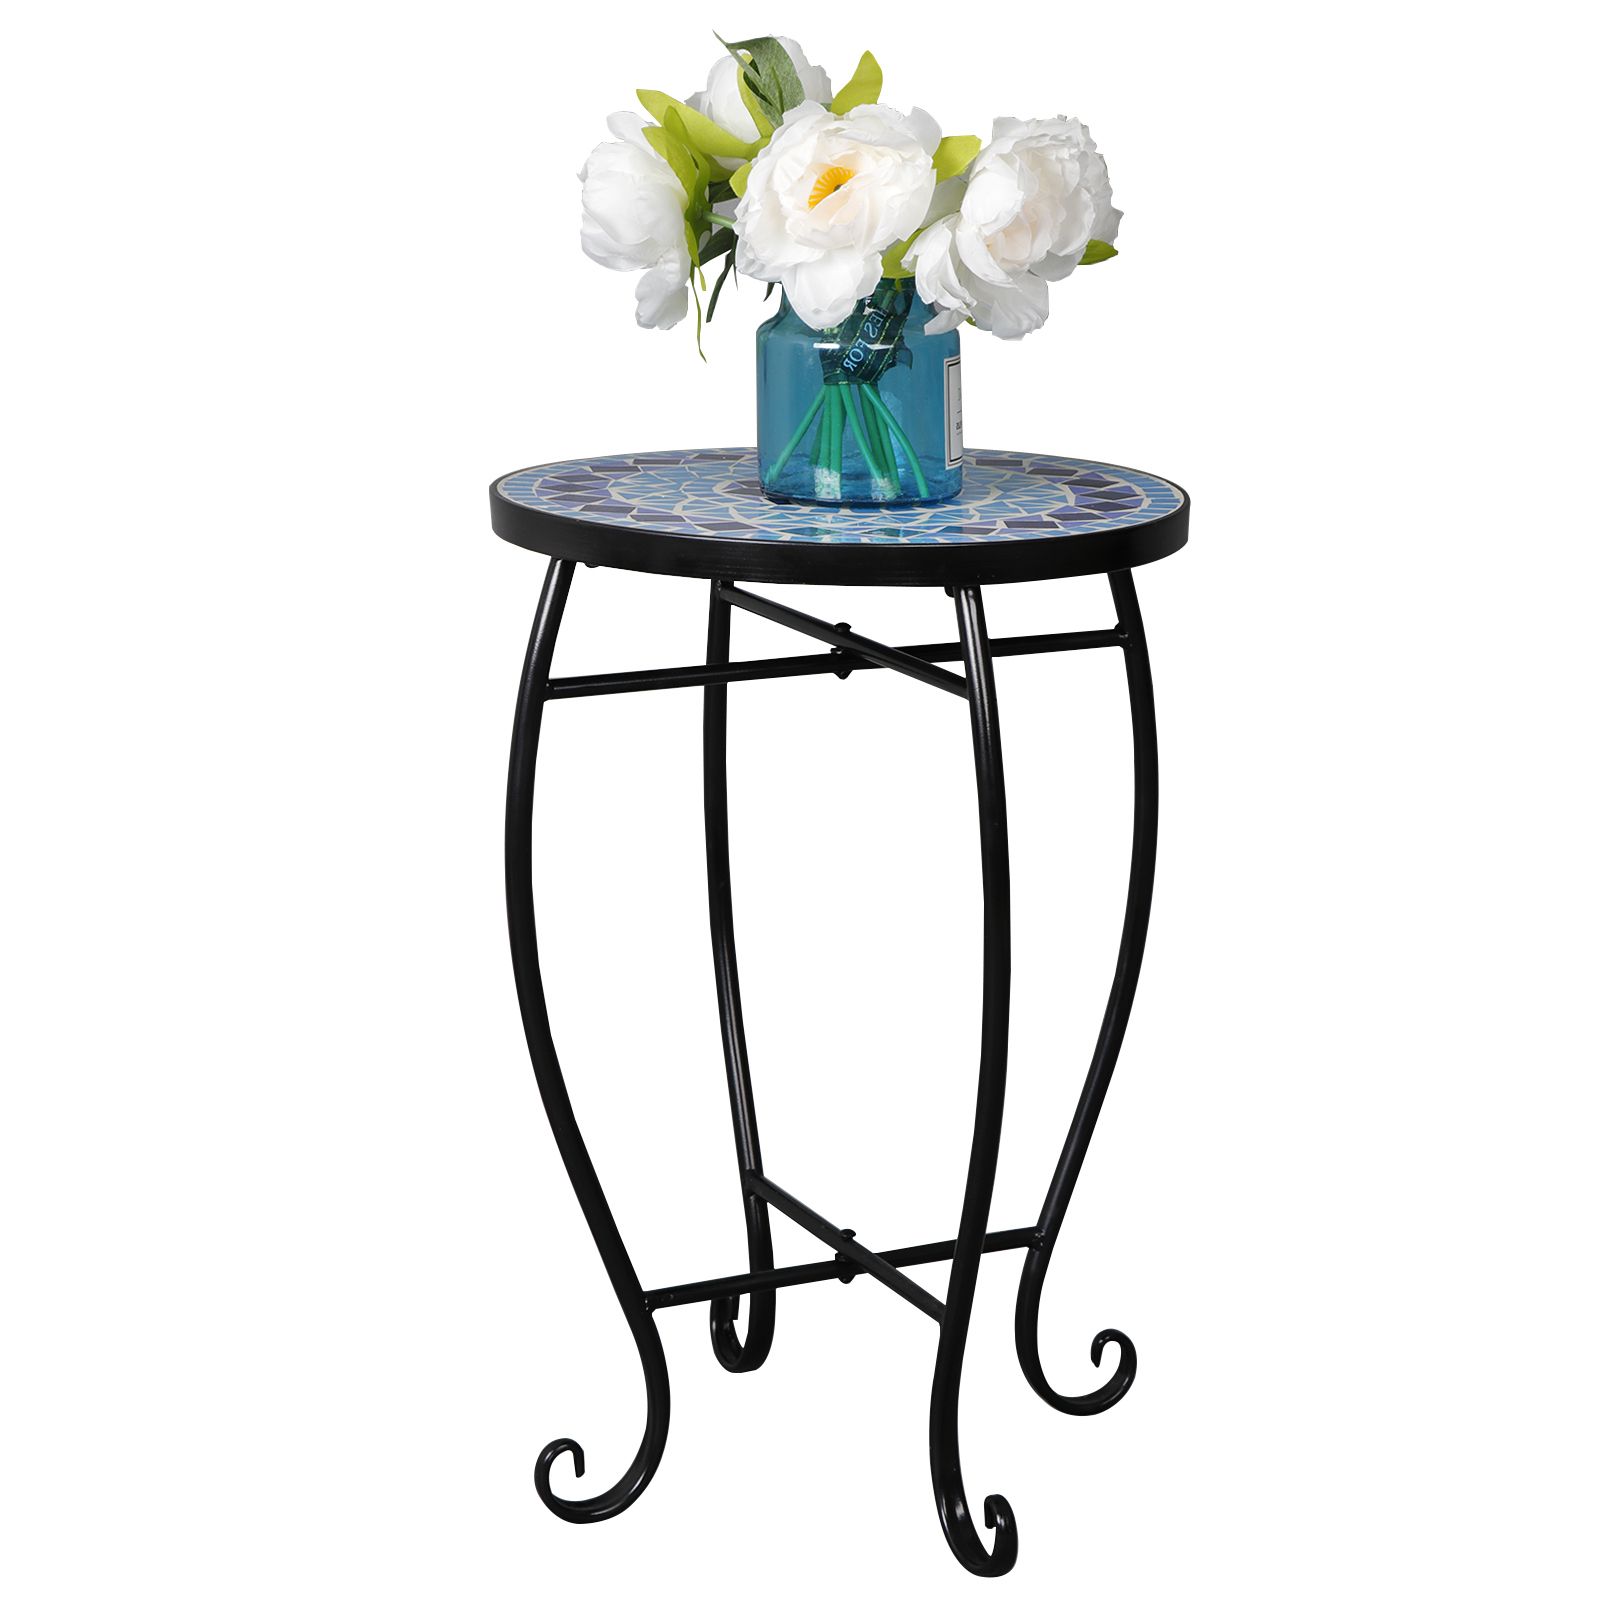 Zeny Mosaic Round Side Accent Table Patio Plant Stand Porch Beach Theme Inside Well Known Mosaic Outdoor Accent Tables (View 5 of 15)